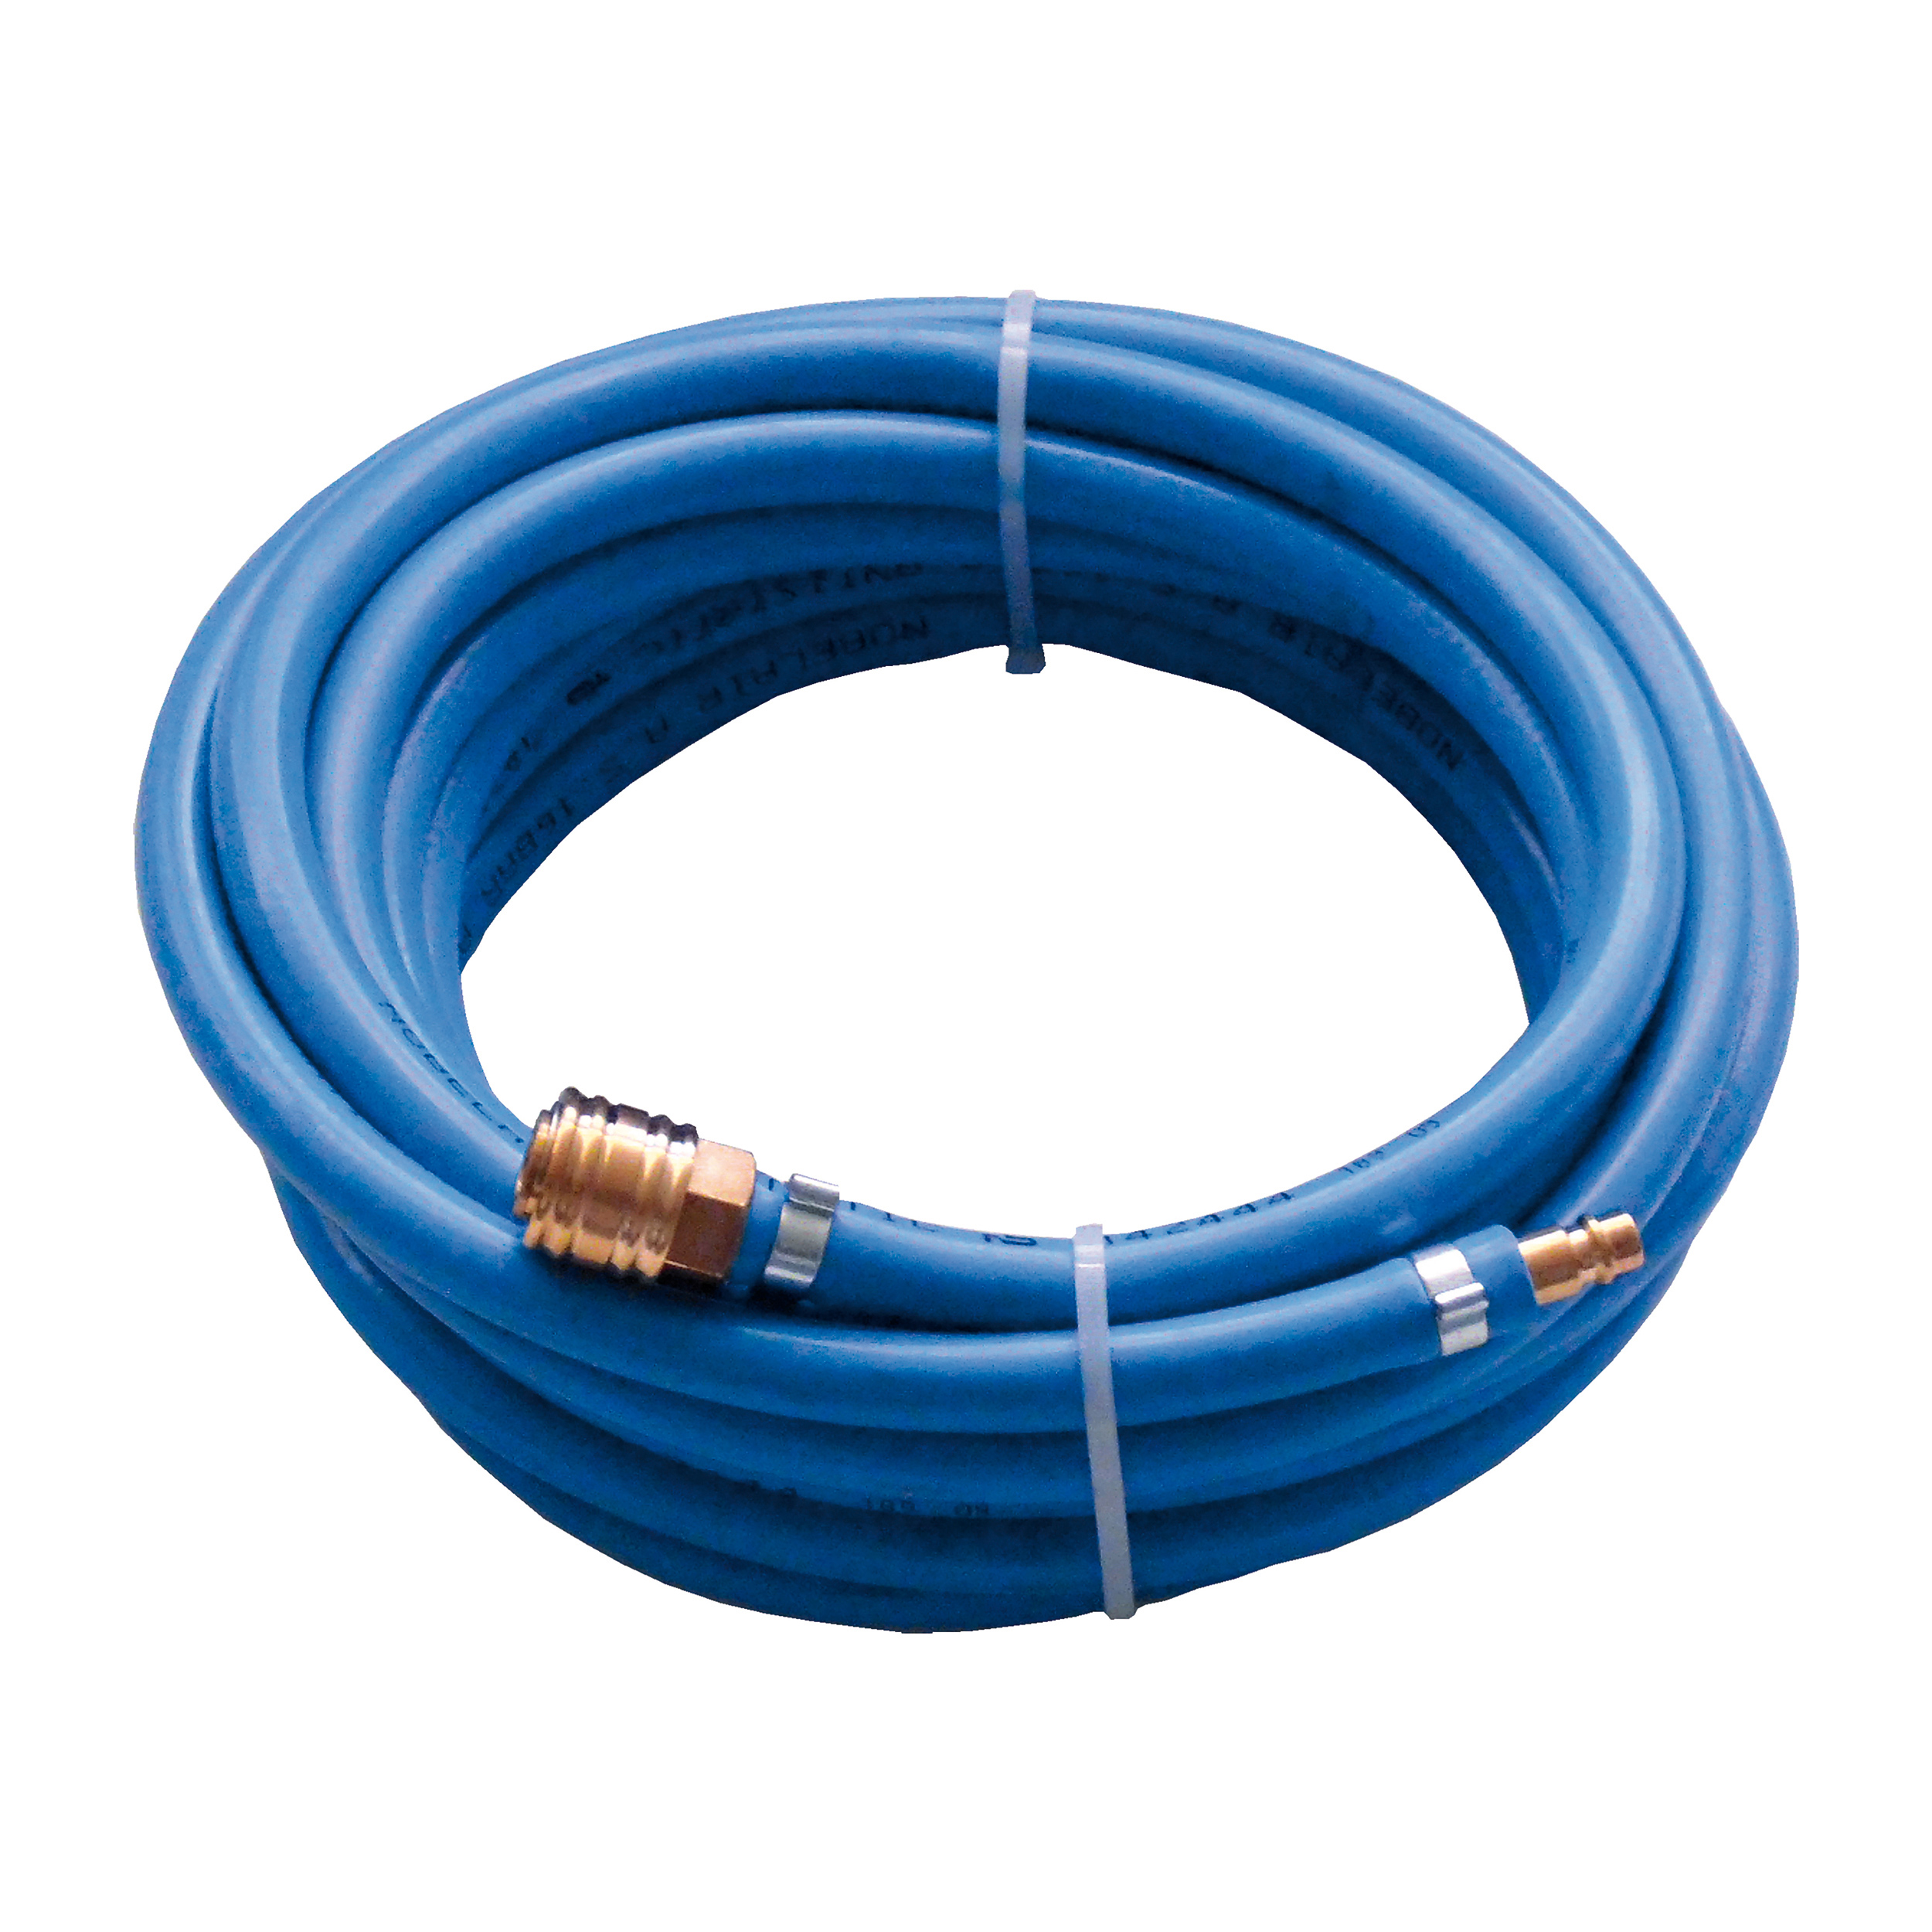 Painting and air hose, 9 × 3.5 mm, 232 psi/16 bar, 8 m, coupling and plug DN 7.2